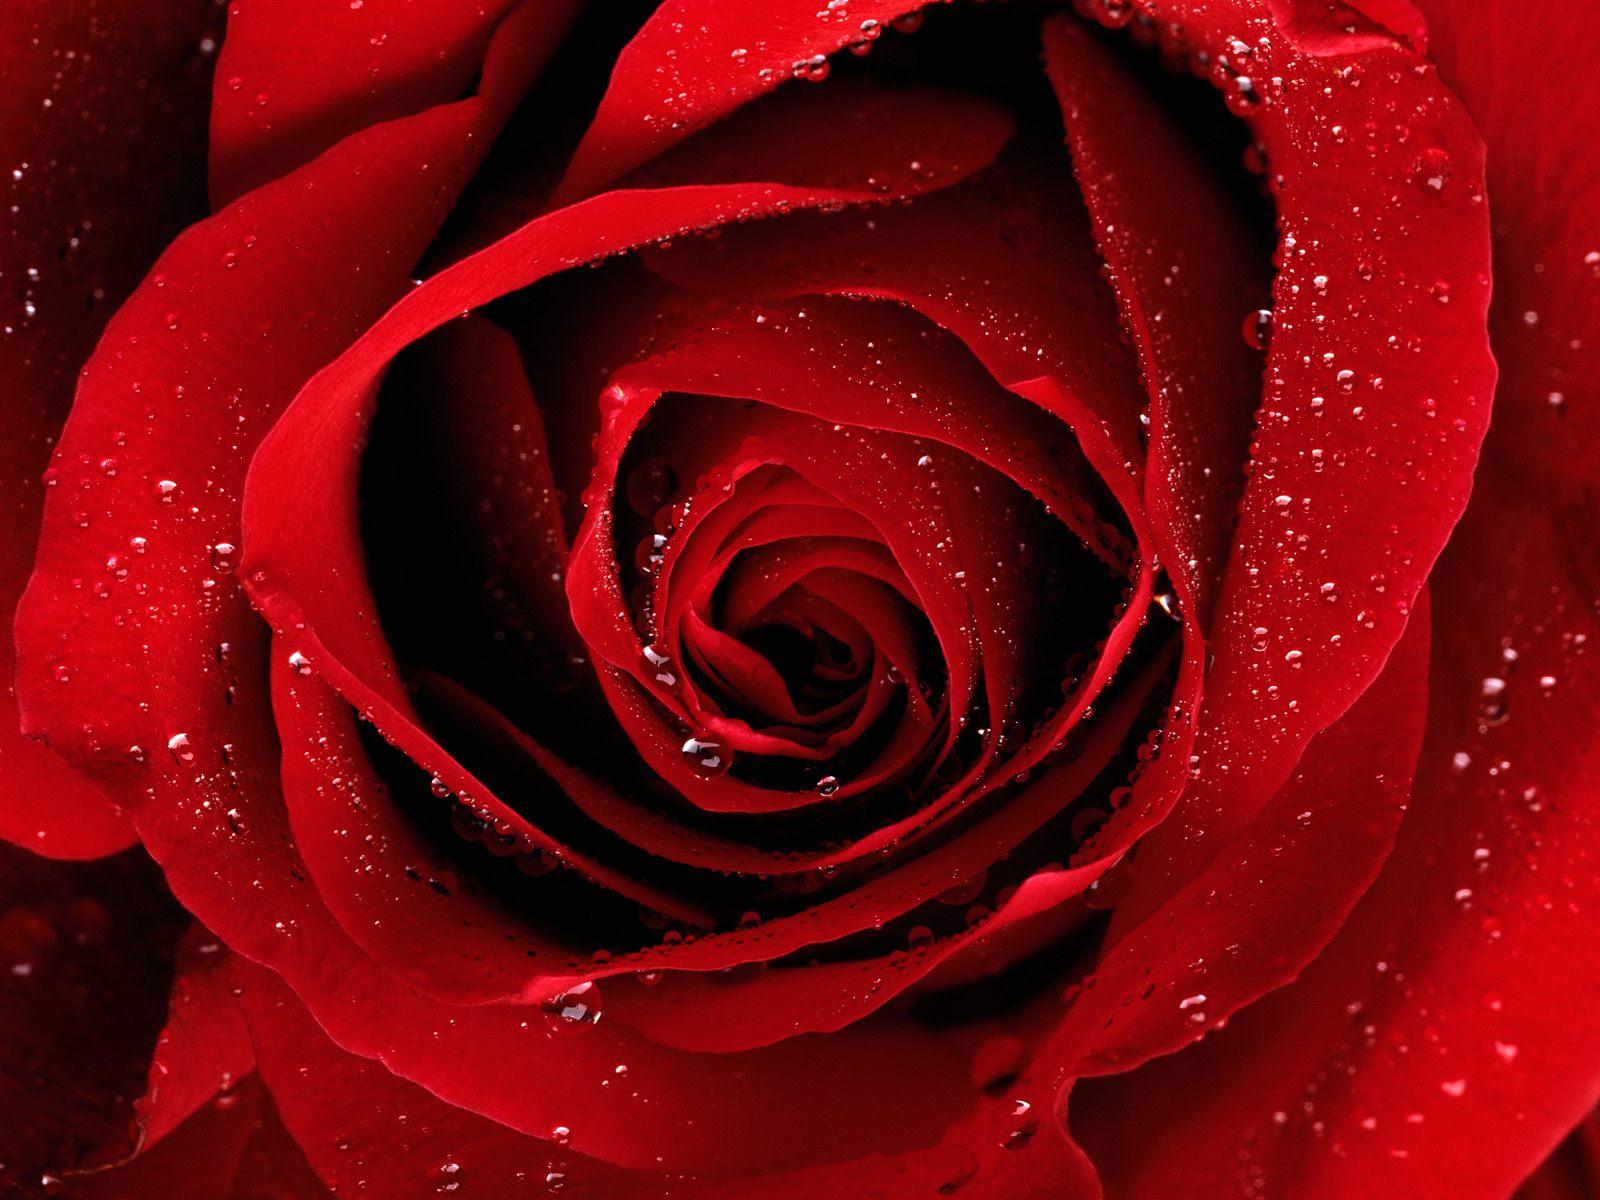 Rose Flower Image Picture Photo Gallery Free Download